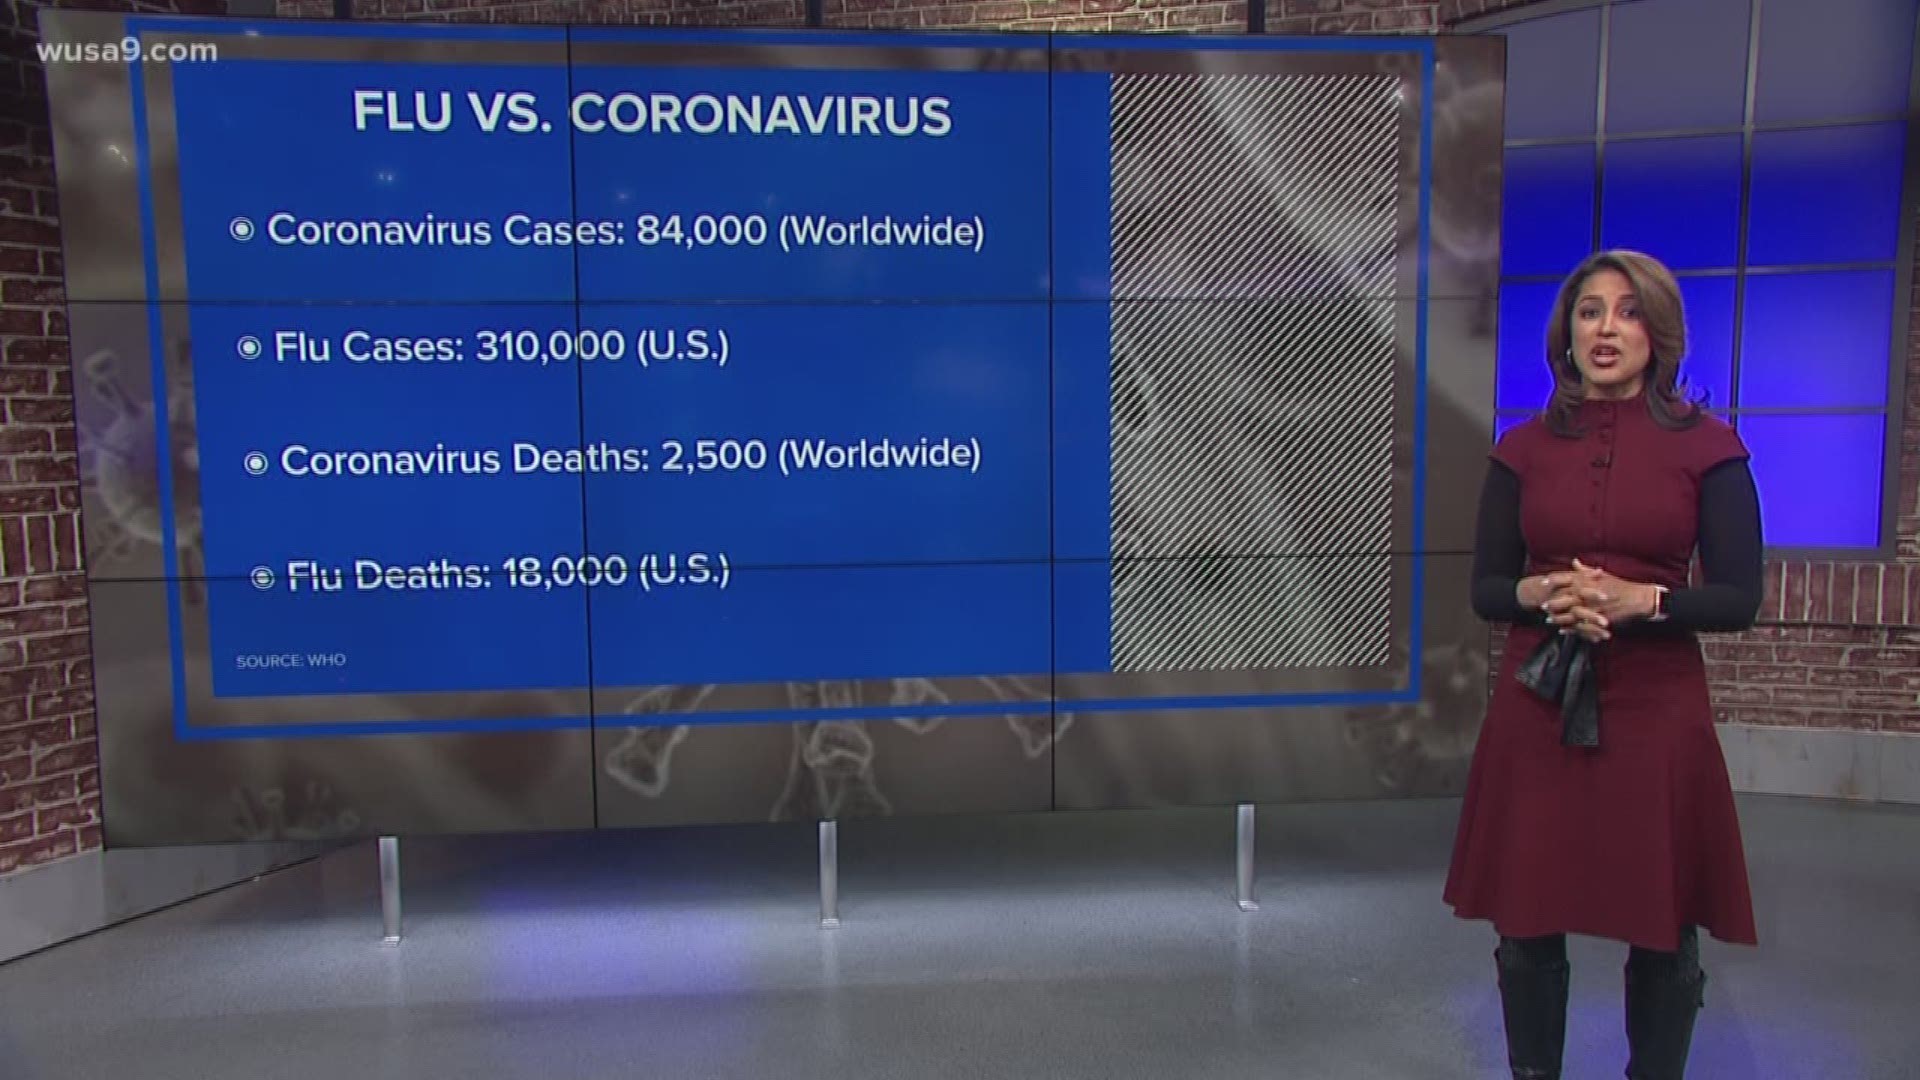 There are 84,000 coronavirus cases worldwide and 310,000 cases of the flu just in the U.S.